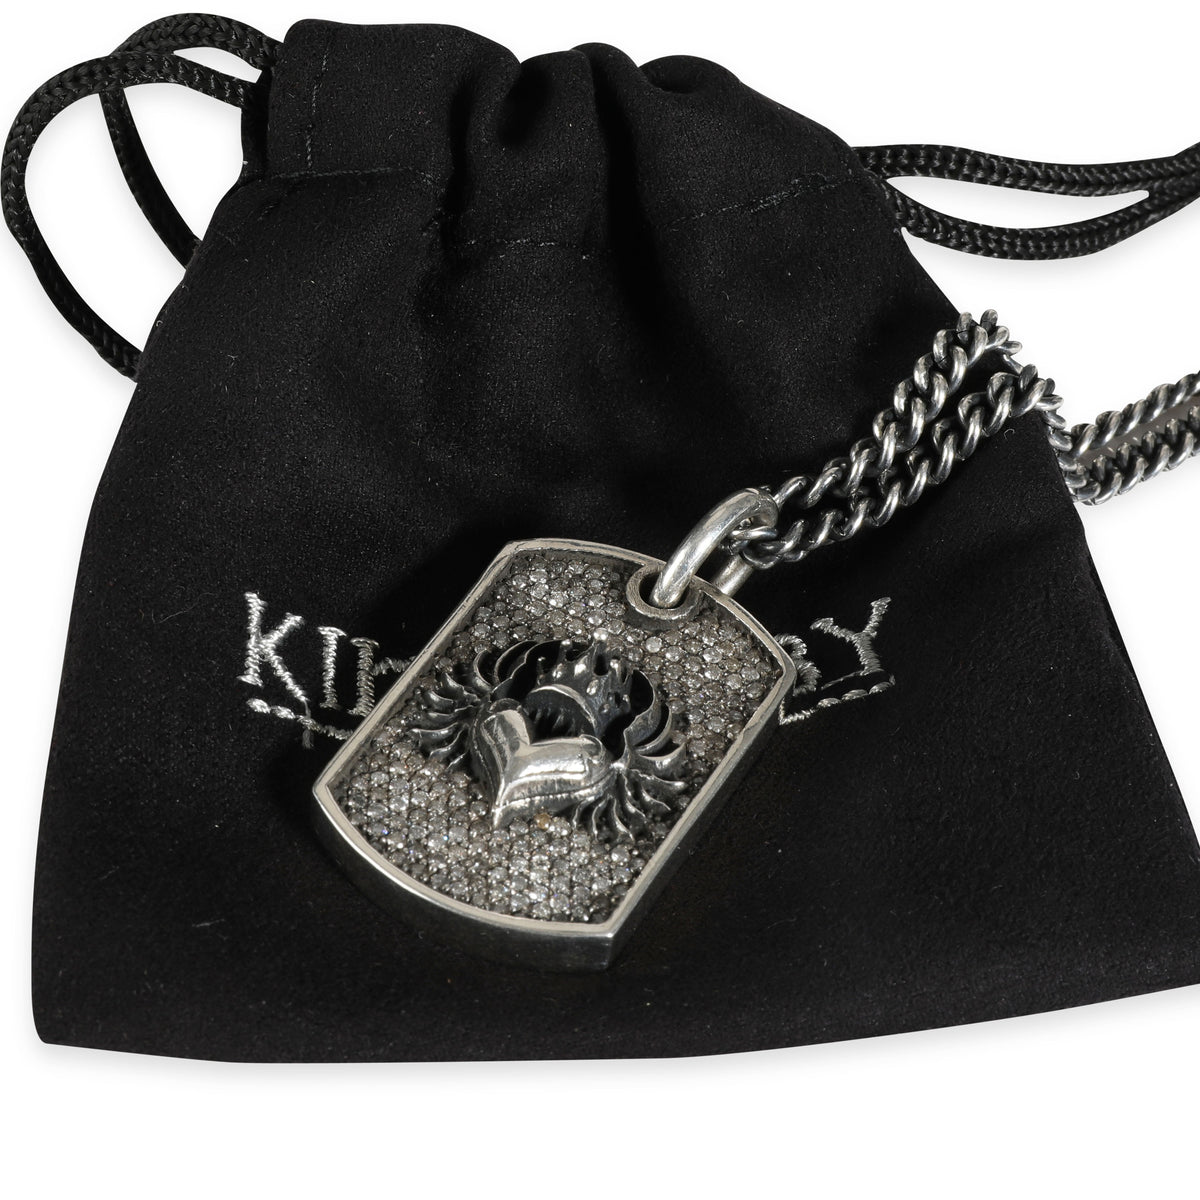 King Baby Diamond Small Chosen Heart Relic Dog Tag Pendant in Sterling Silver